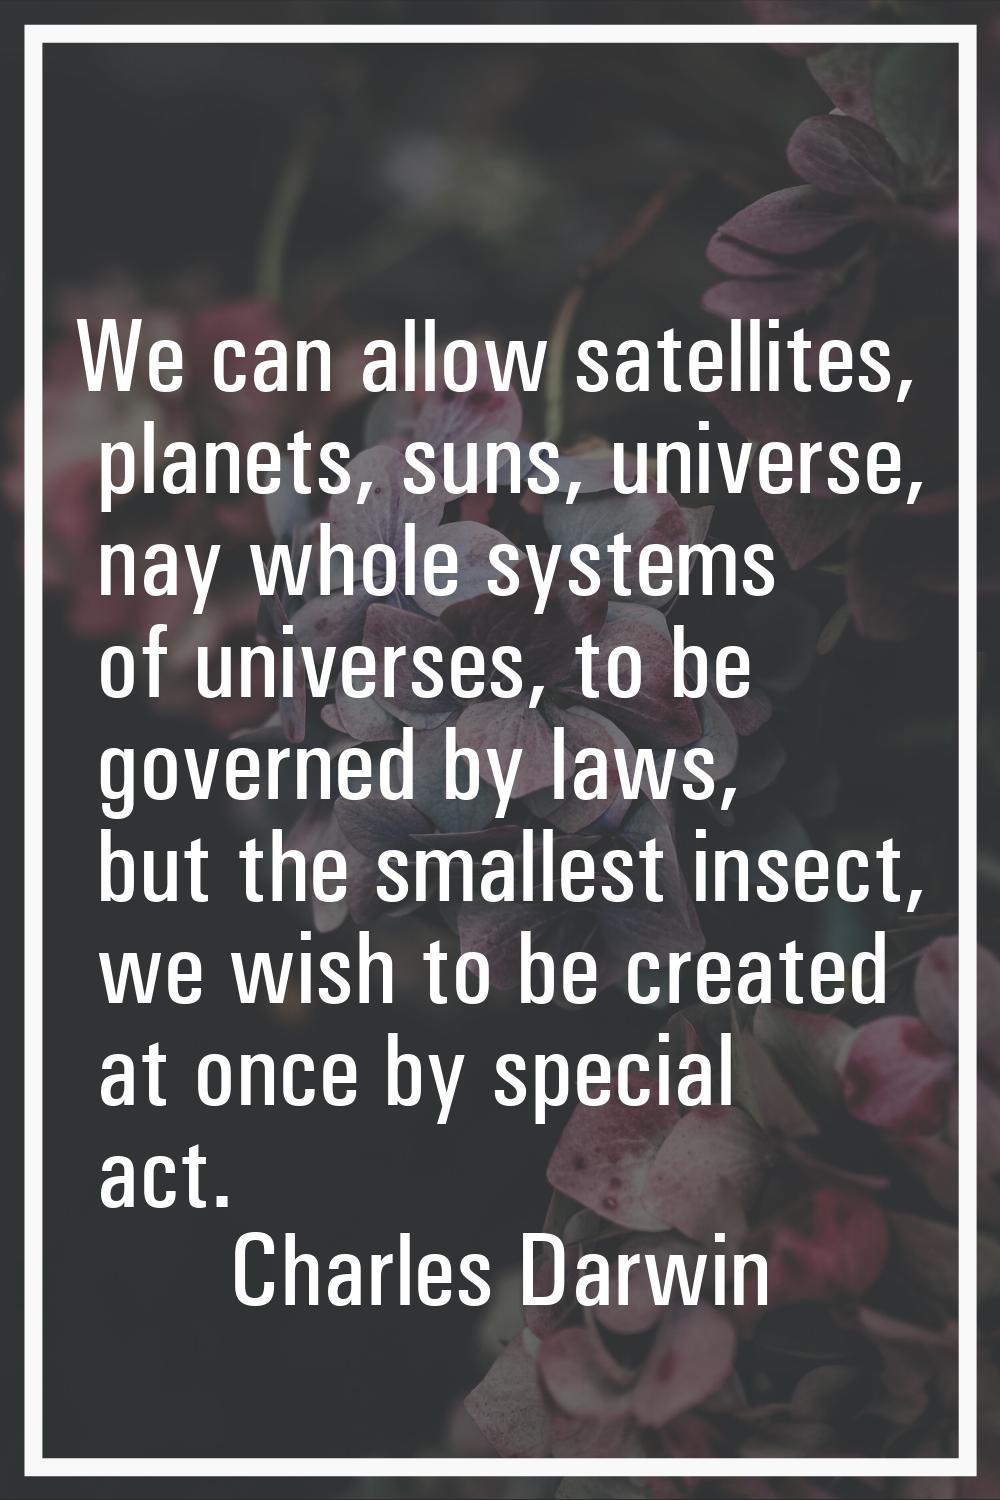 We can allow satellites, planets, suns, universe, nay whole systems of universes, to be governed by